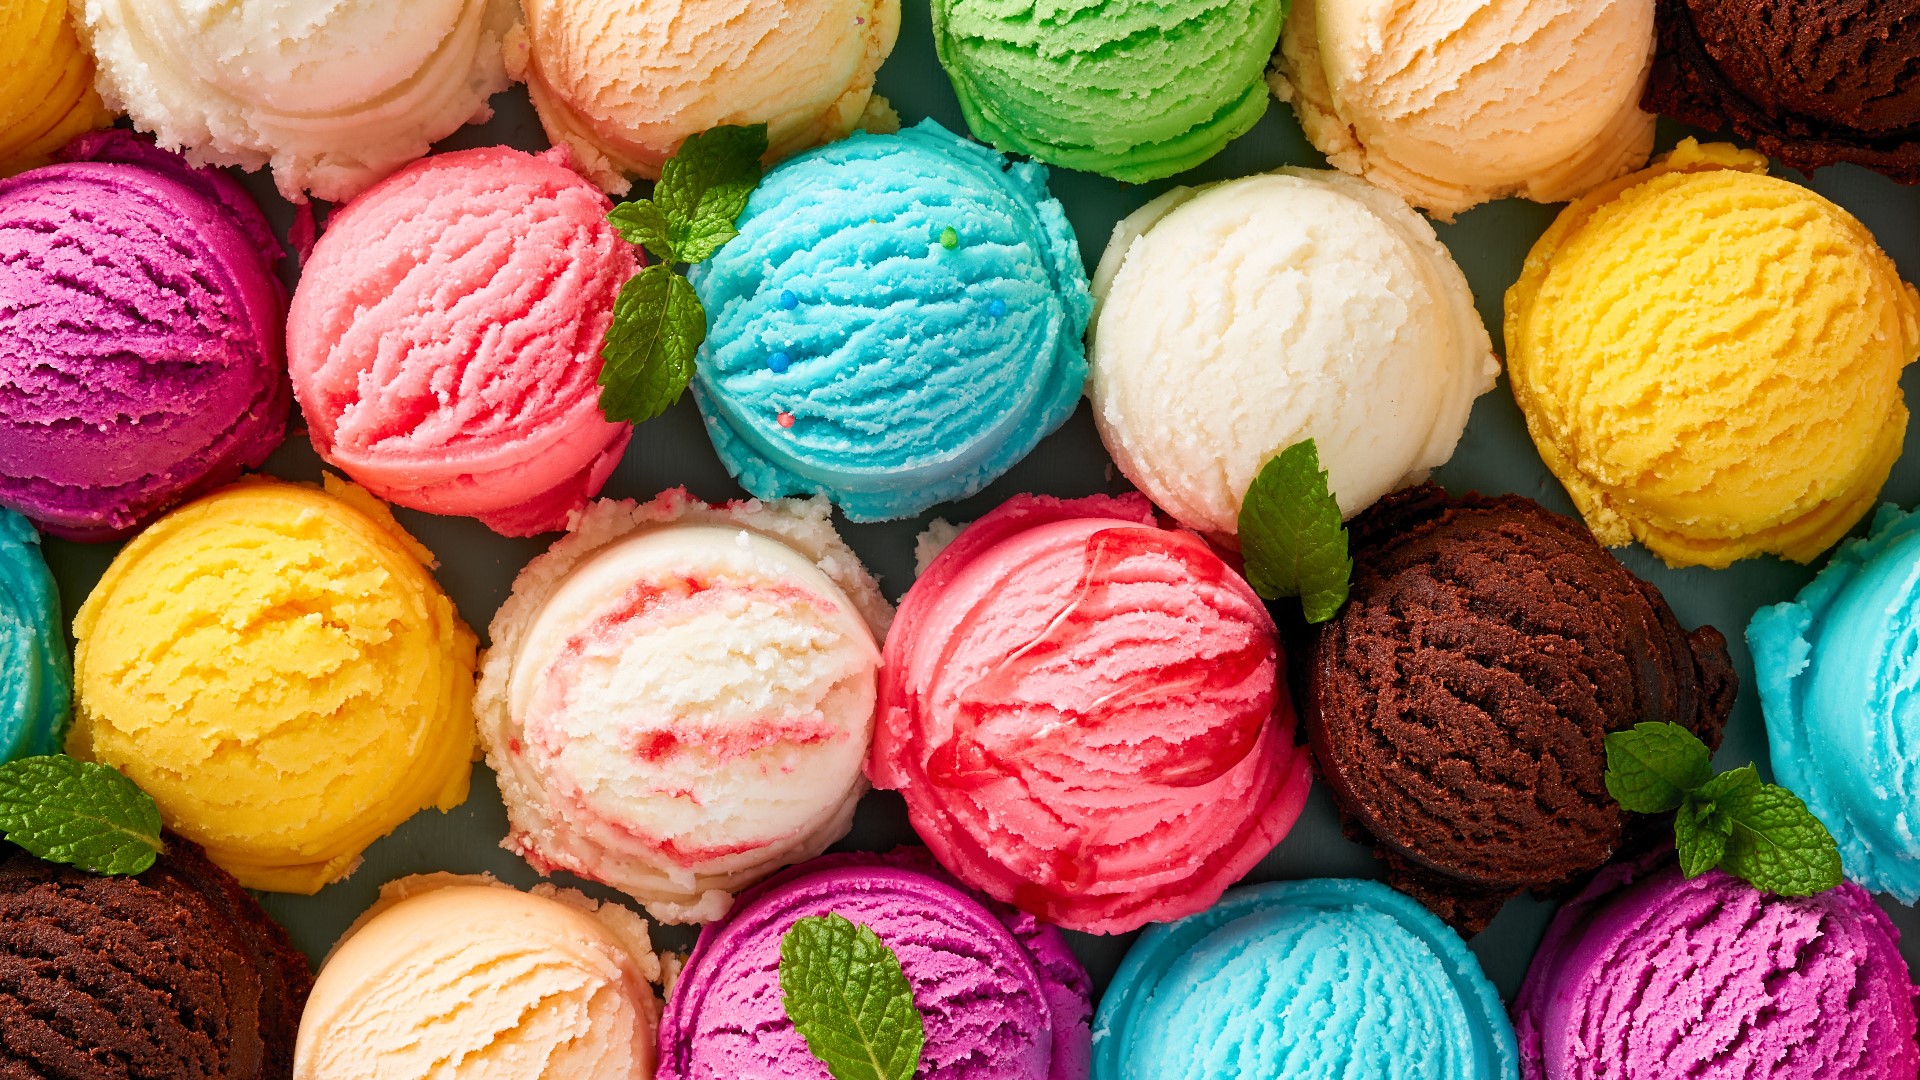 The American Dairy Association is looking for an honorary CIO—chief ice cream officer.